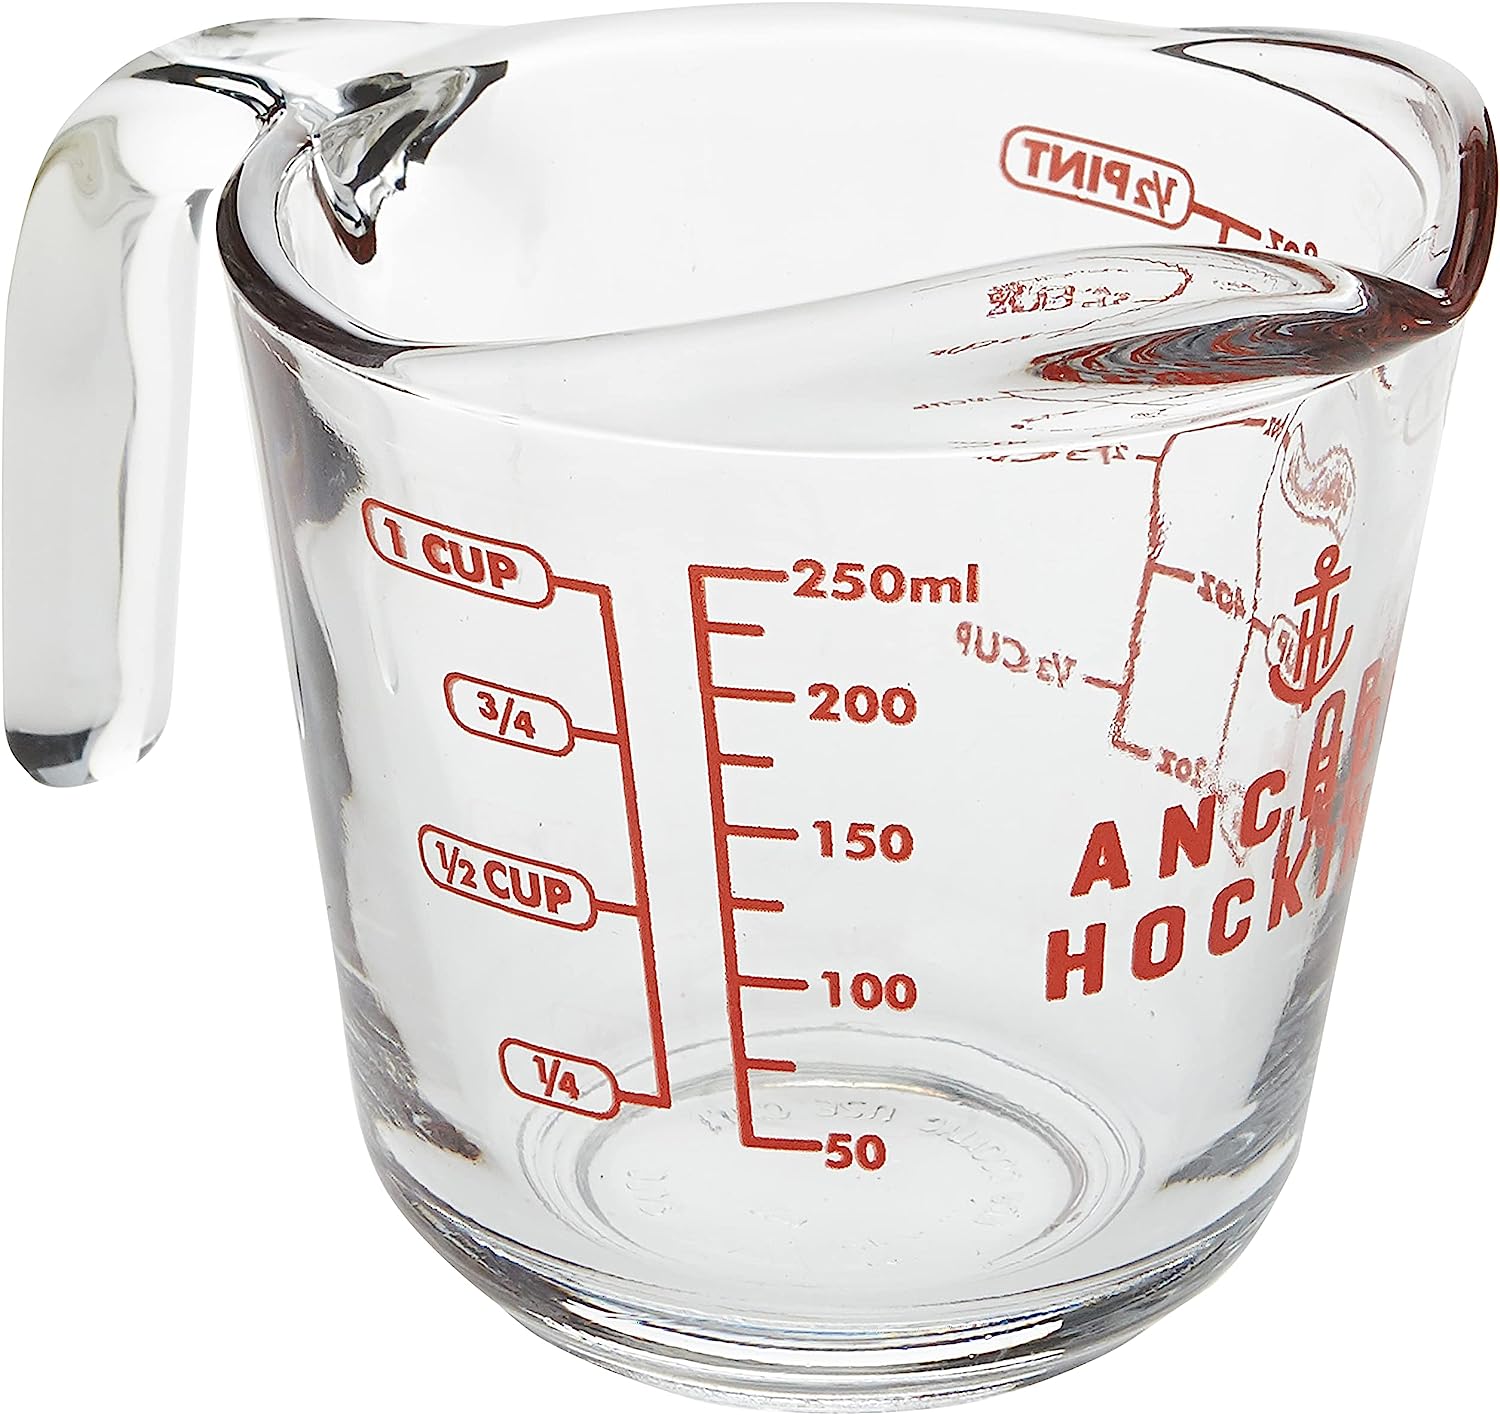 8-Ounce Anchor Hocking Glass Measuring Cup